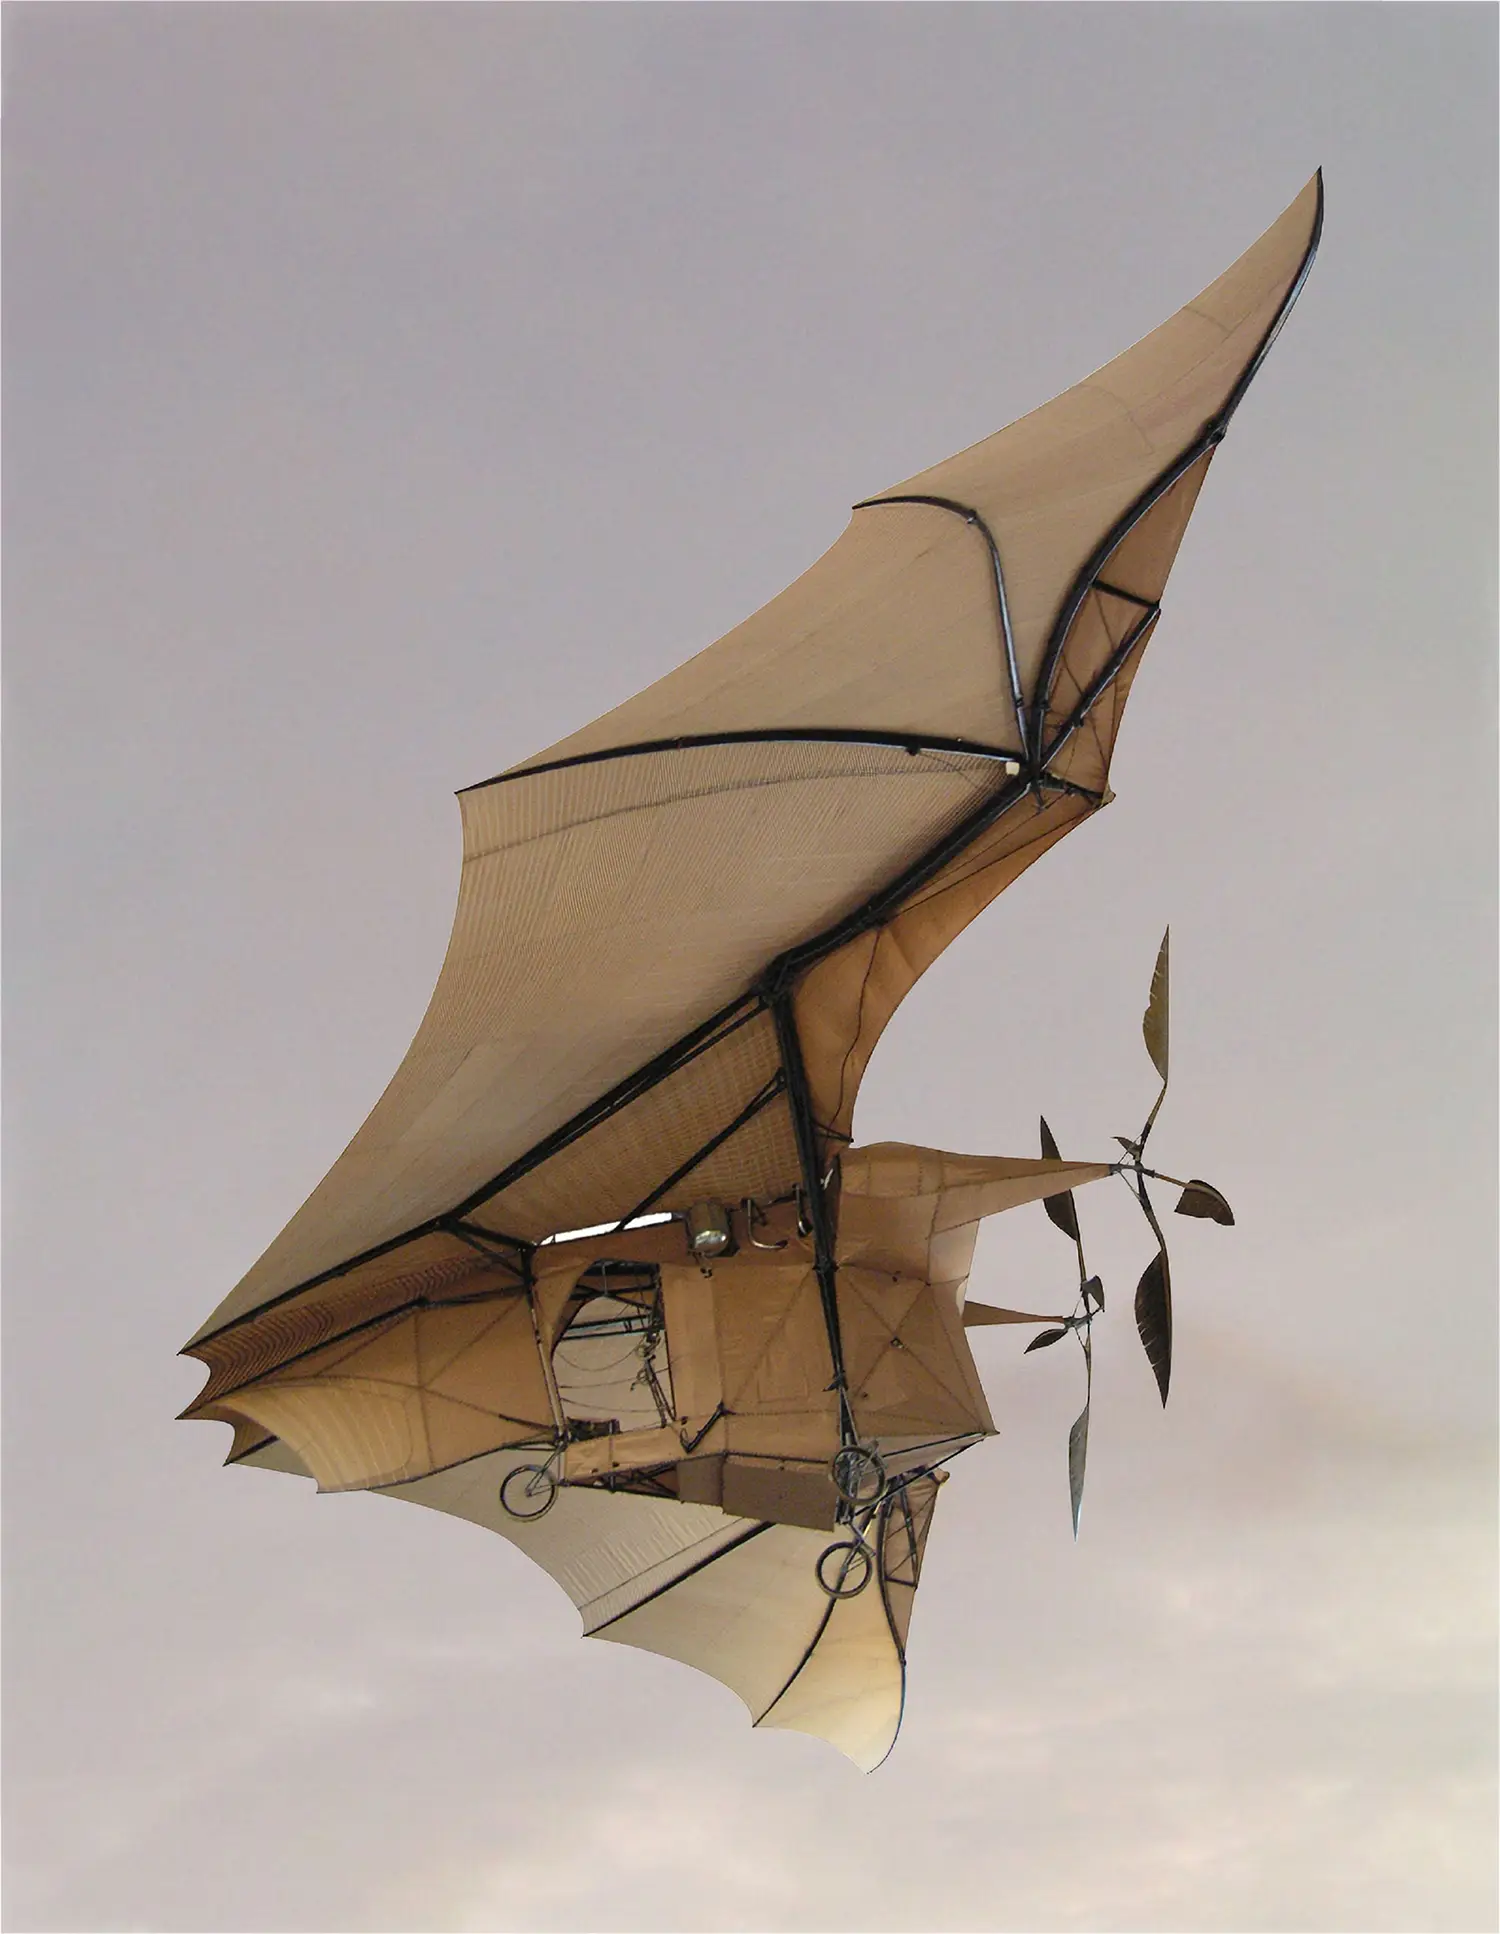 An old, experimental aircraft that appears to be made of canvas and metal tubing.